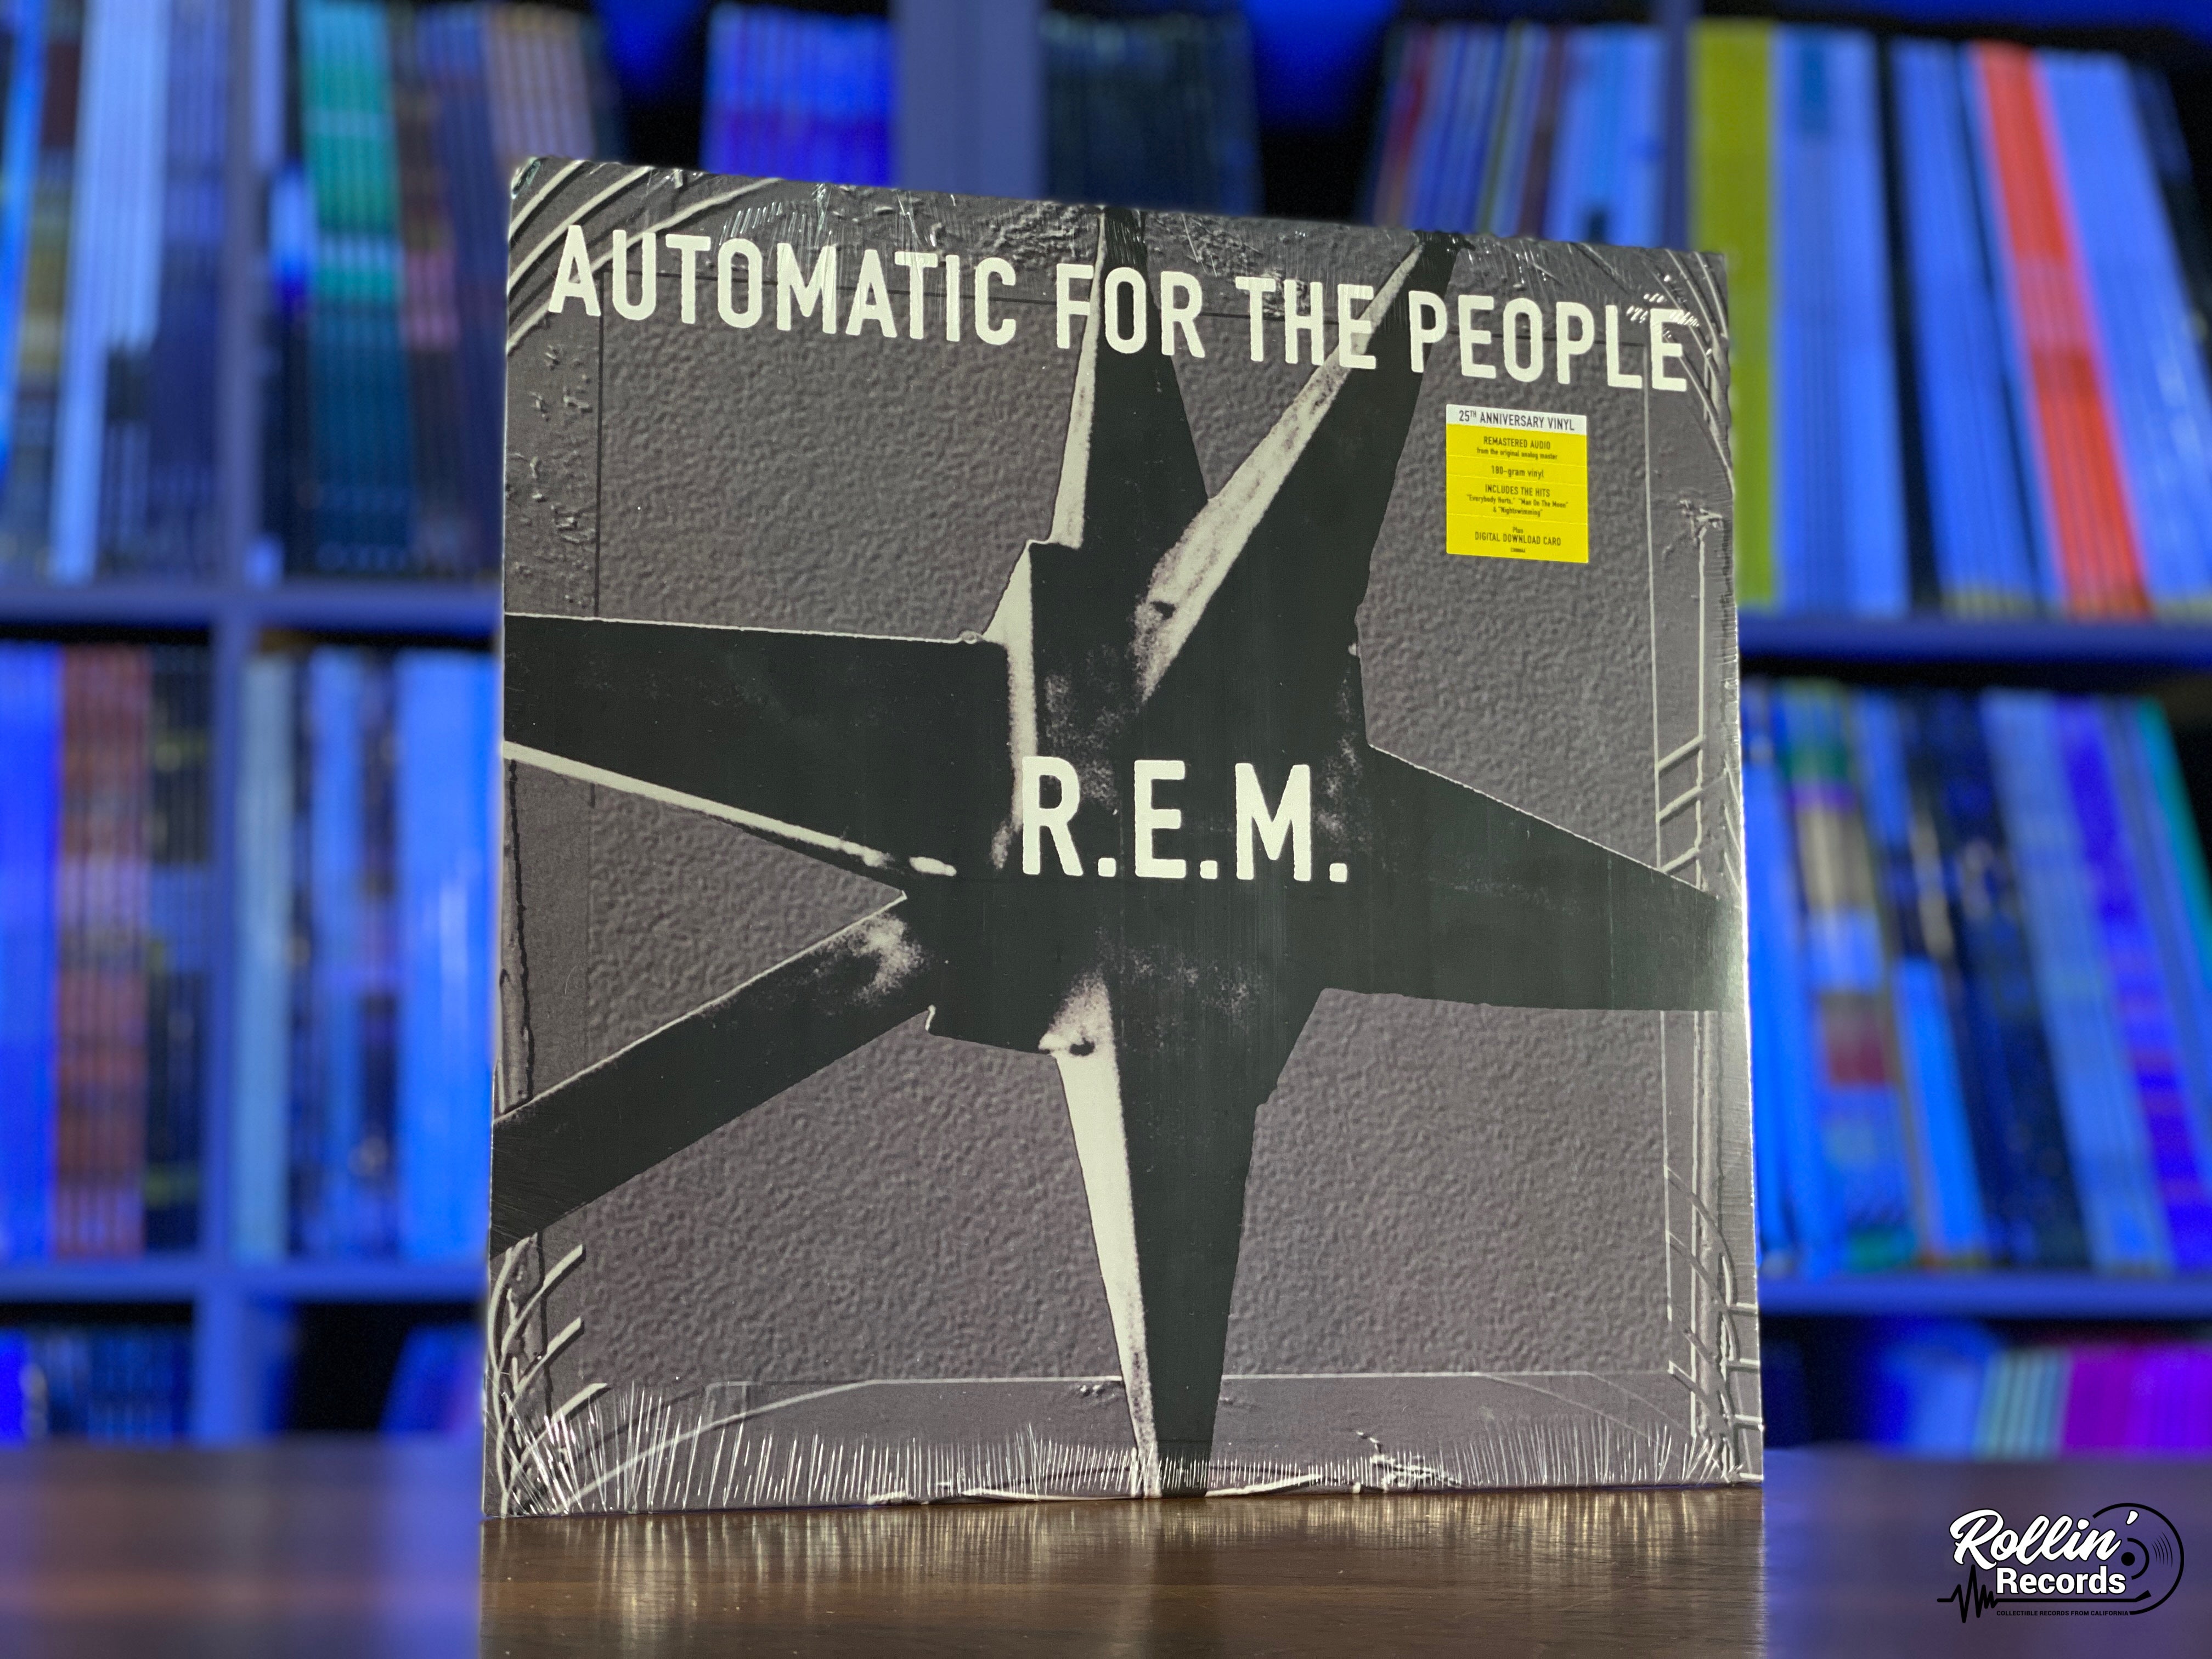 R.E.M. – Automatic For The People LP 25th Anniversary 180gm Vinyl